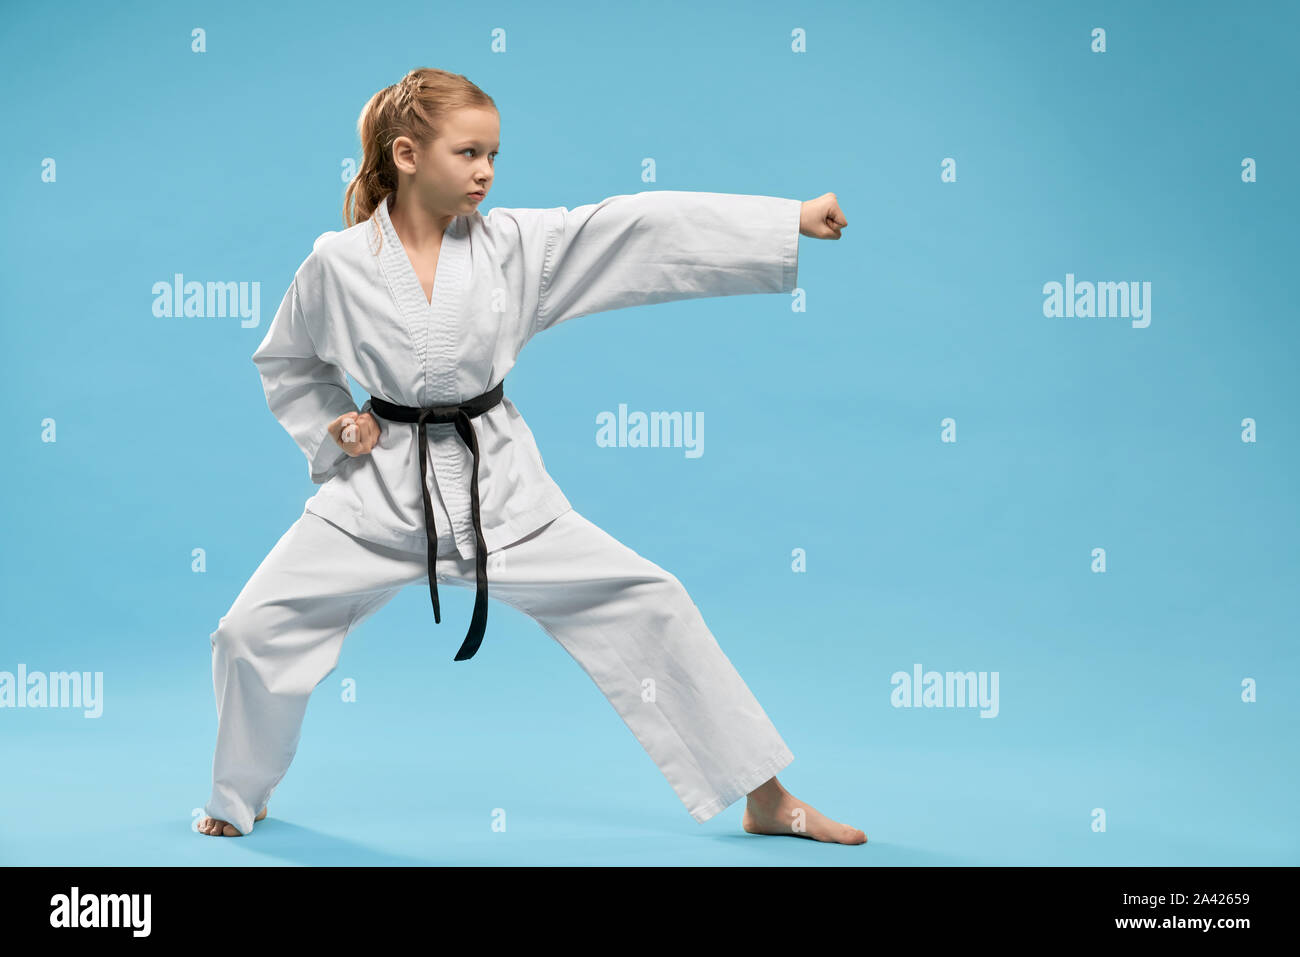 Pretty, young girl practicing karate and jujitsu. Confident junior wearing in white kimono with black belt standing in stance. Concept of wellness and martial arts. Stock Photo